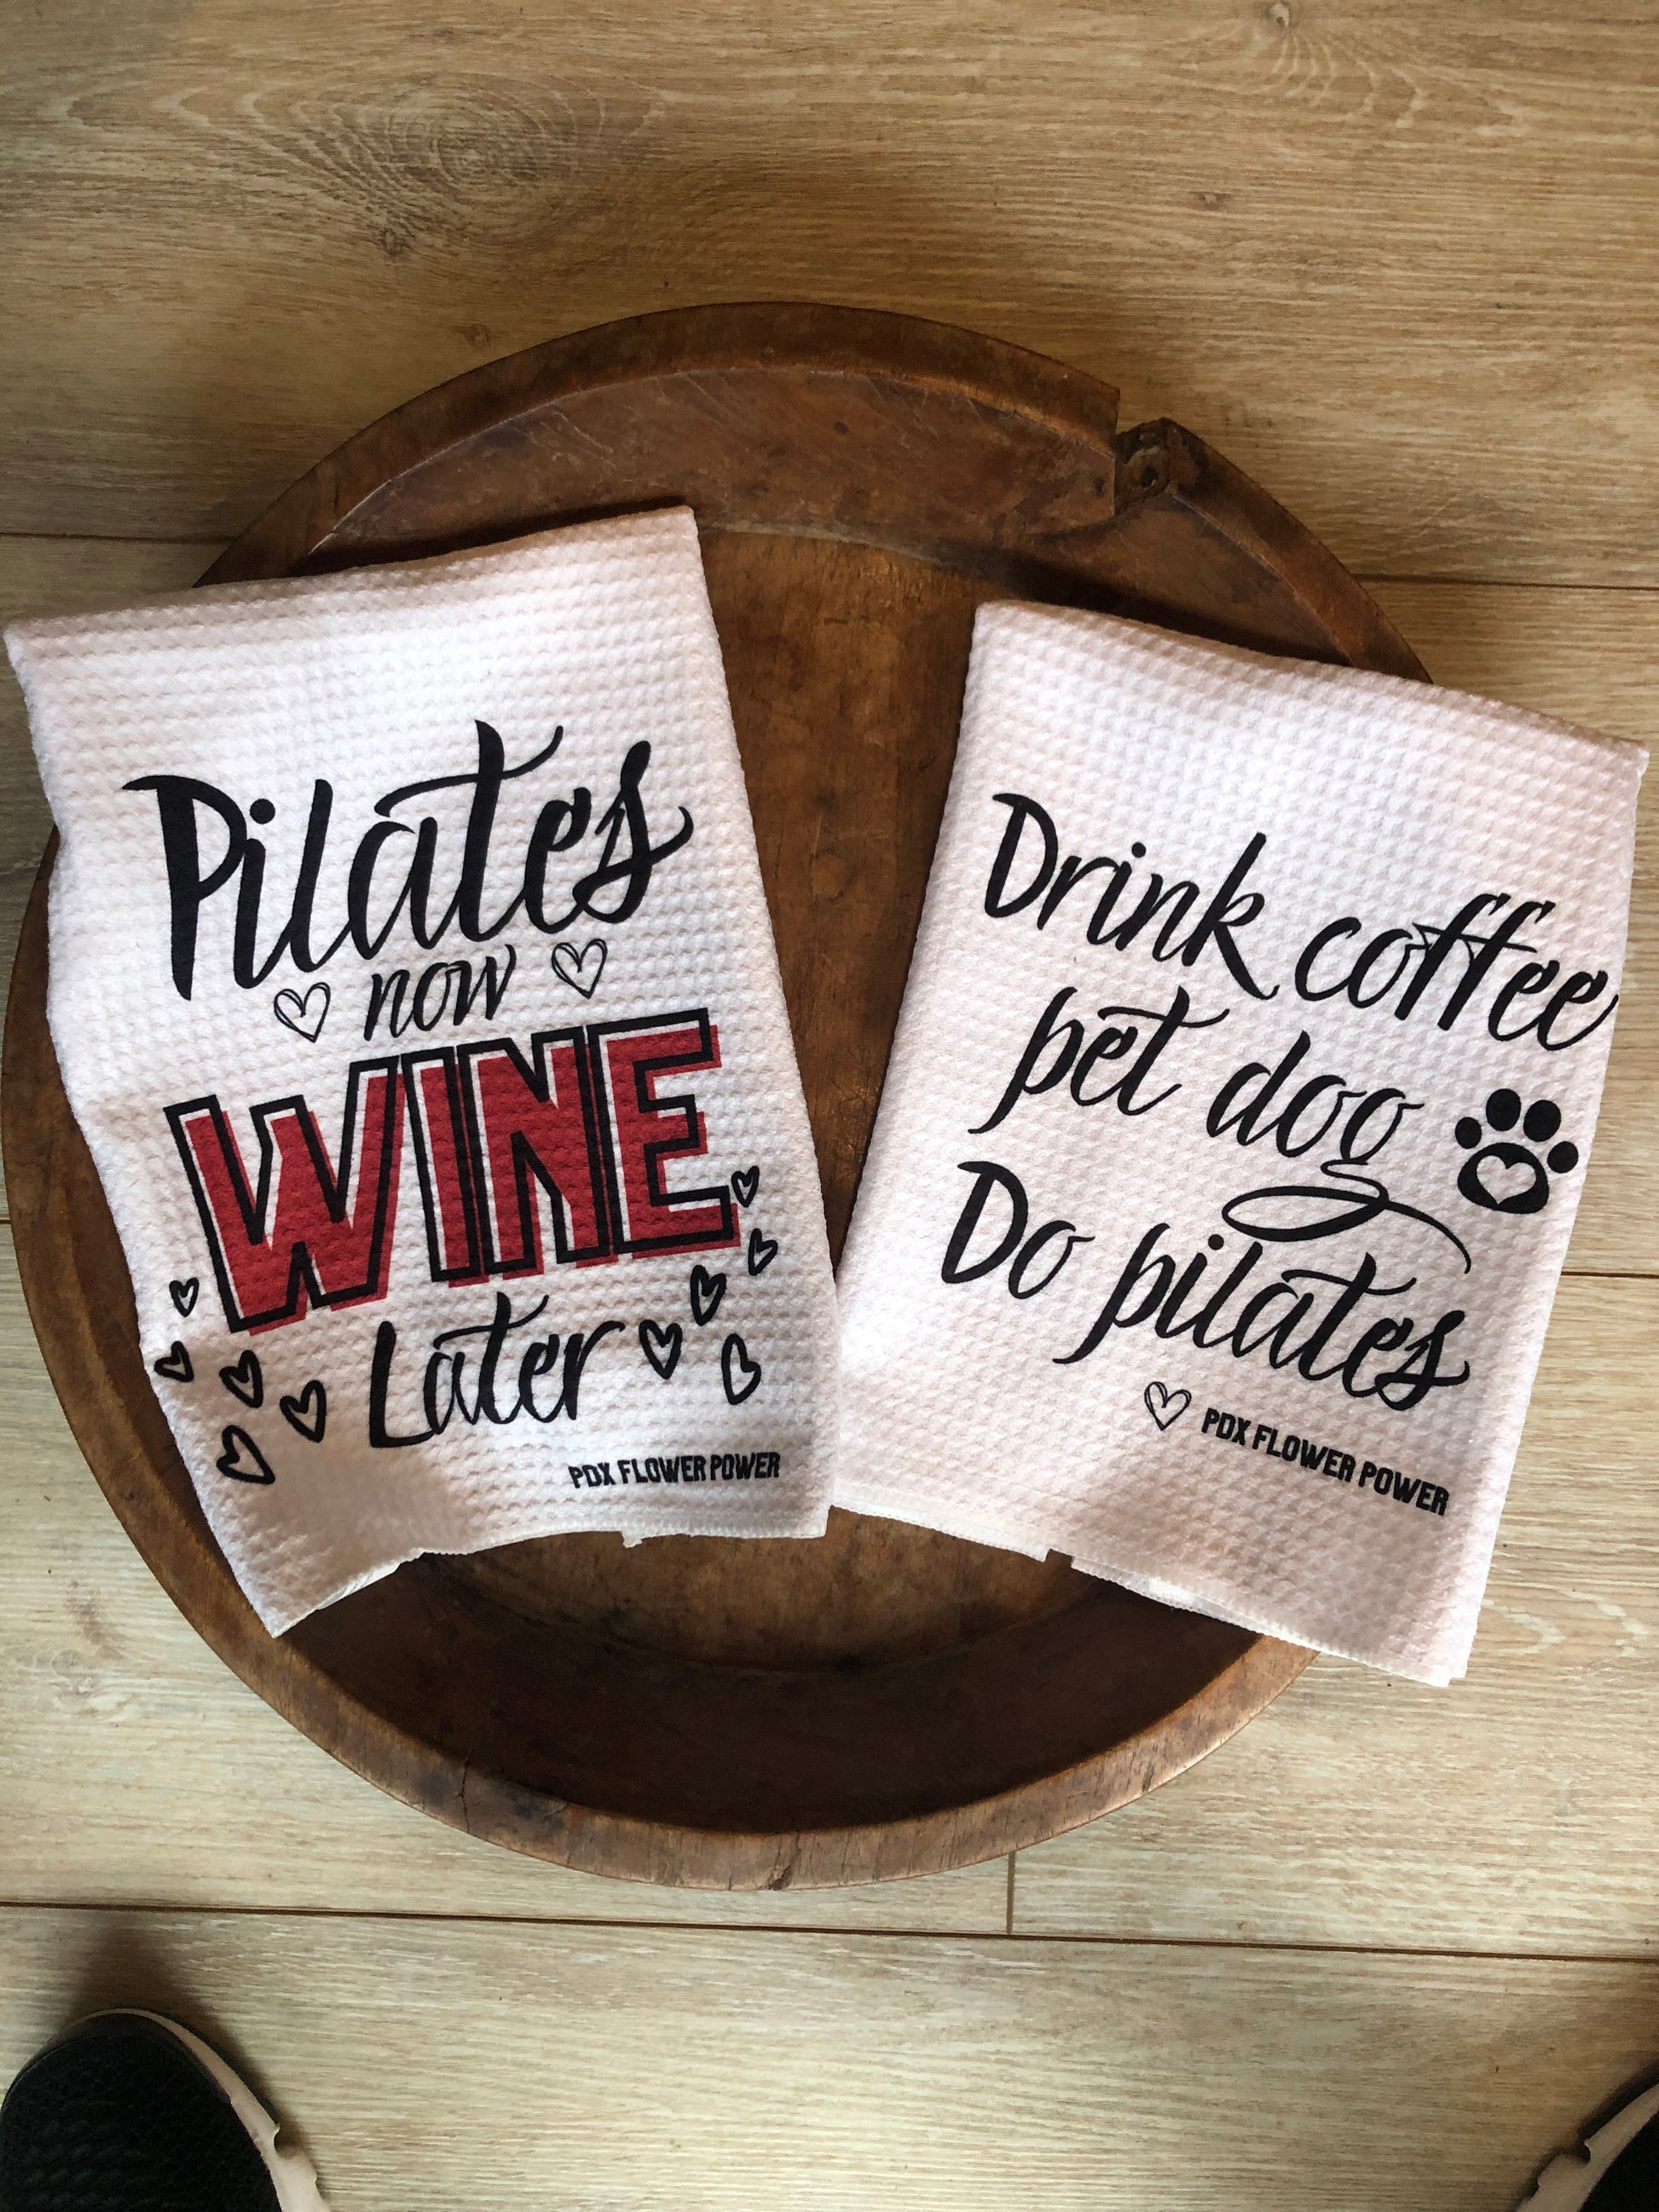 Pilates Gift set Pilates now Wine later and Dink coffee pet dog